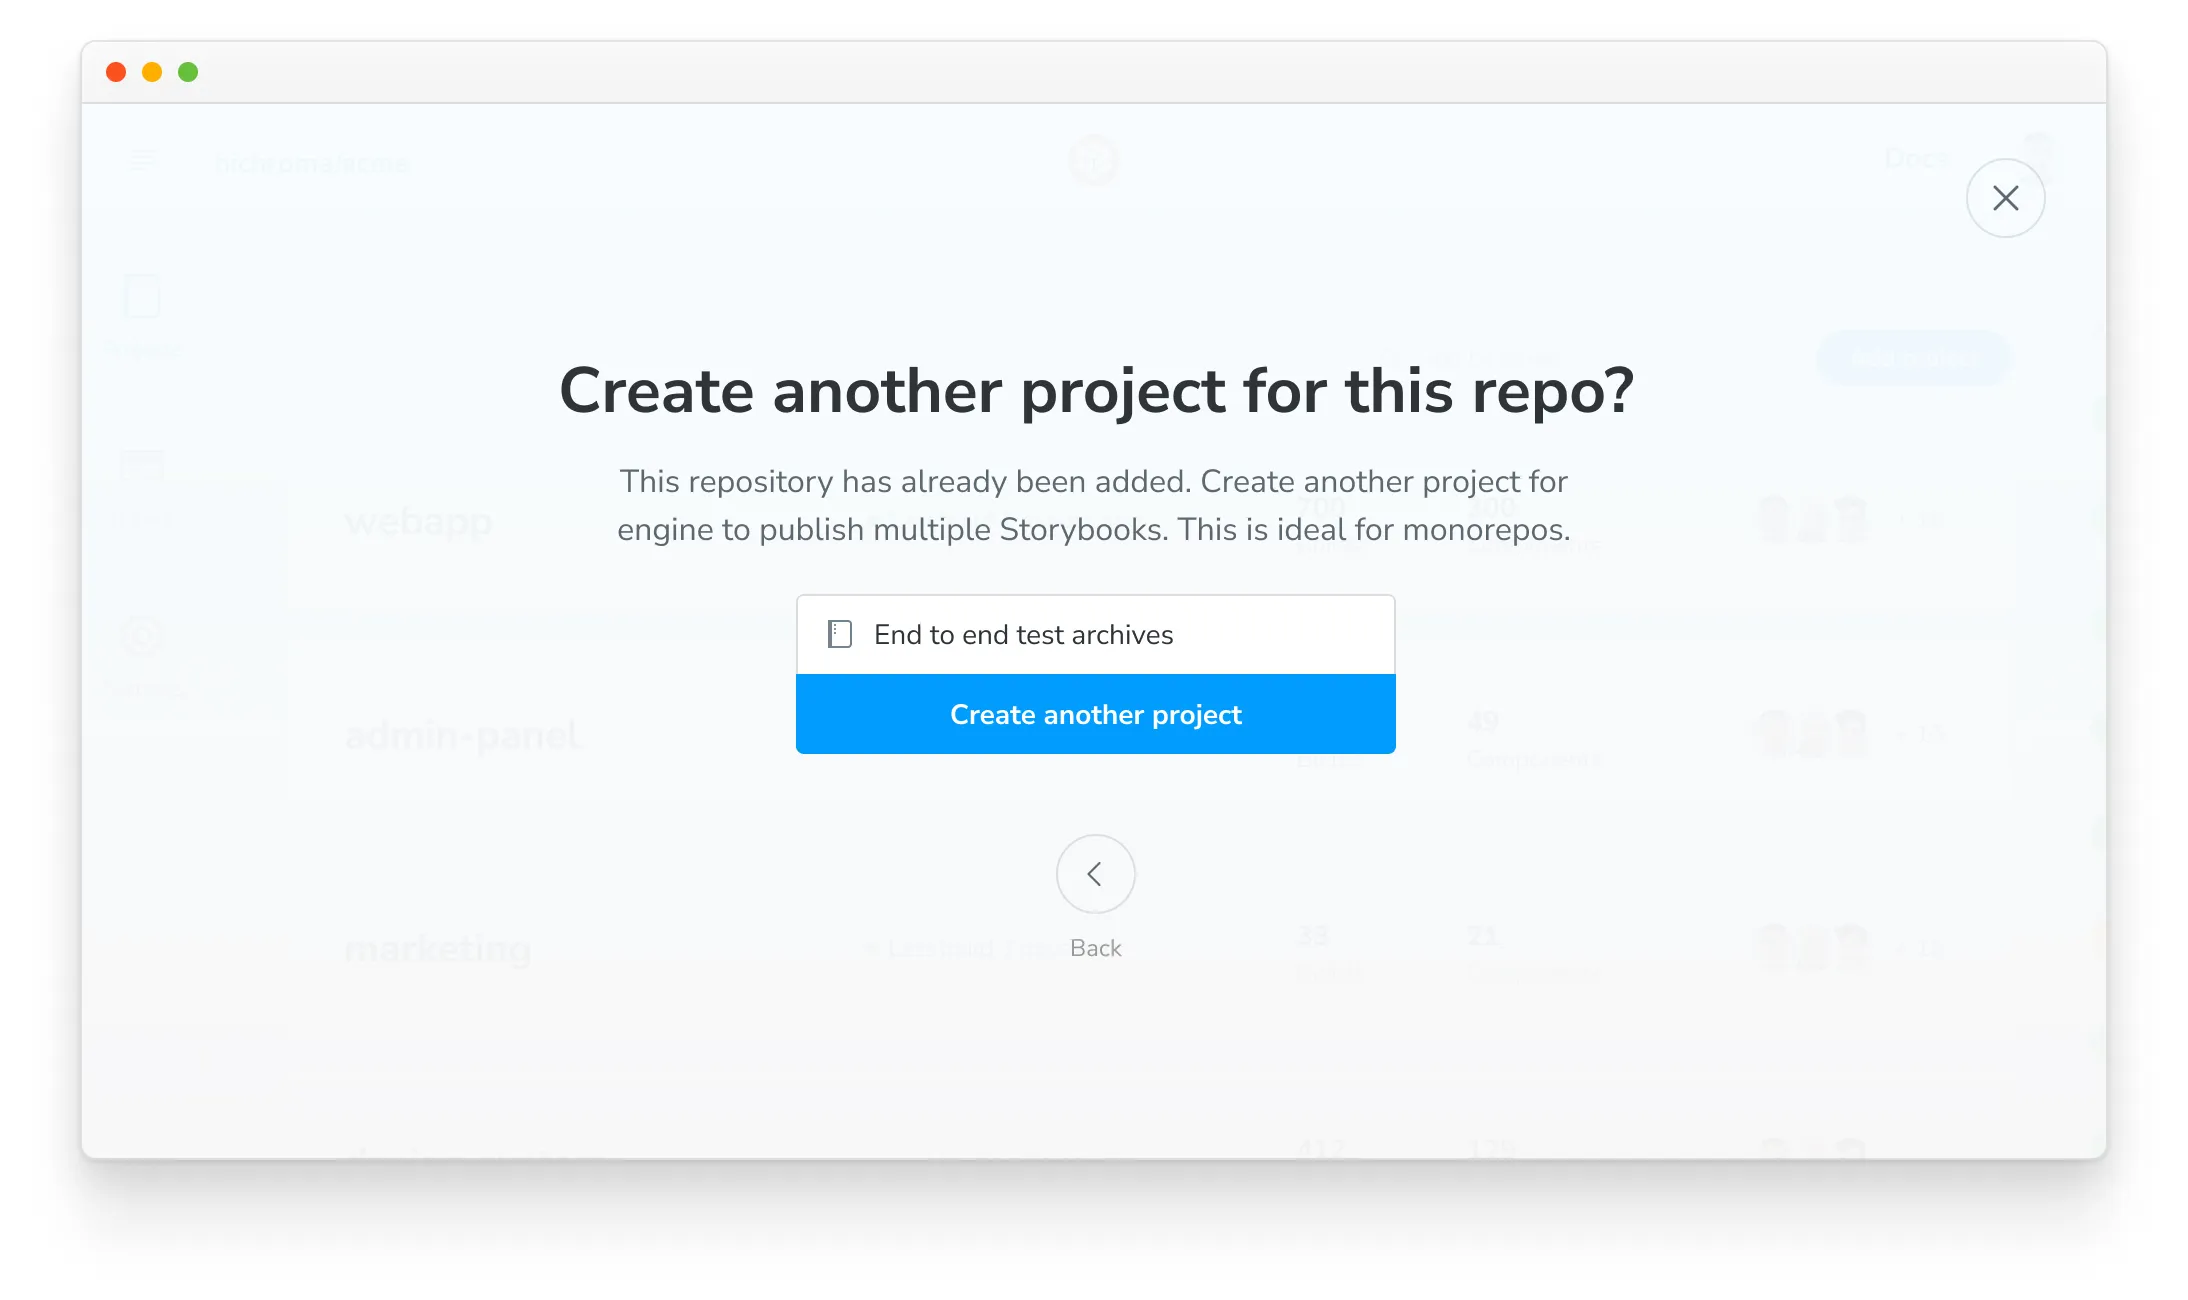 A screen with the heading "Create another project for this repo?" followed by a text input for the name of the project and a submit button labeled "Create another project"